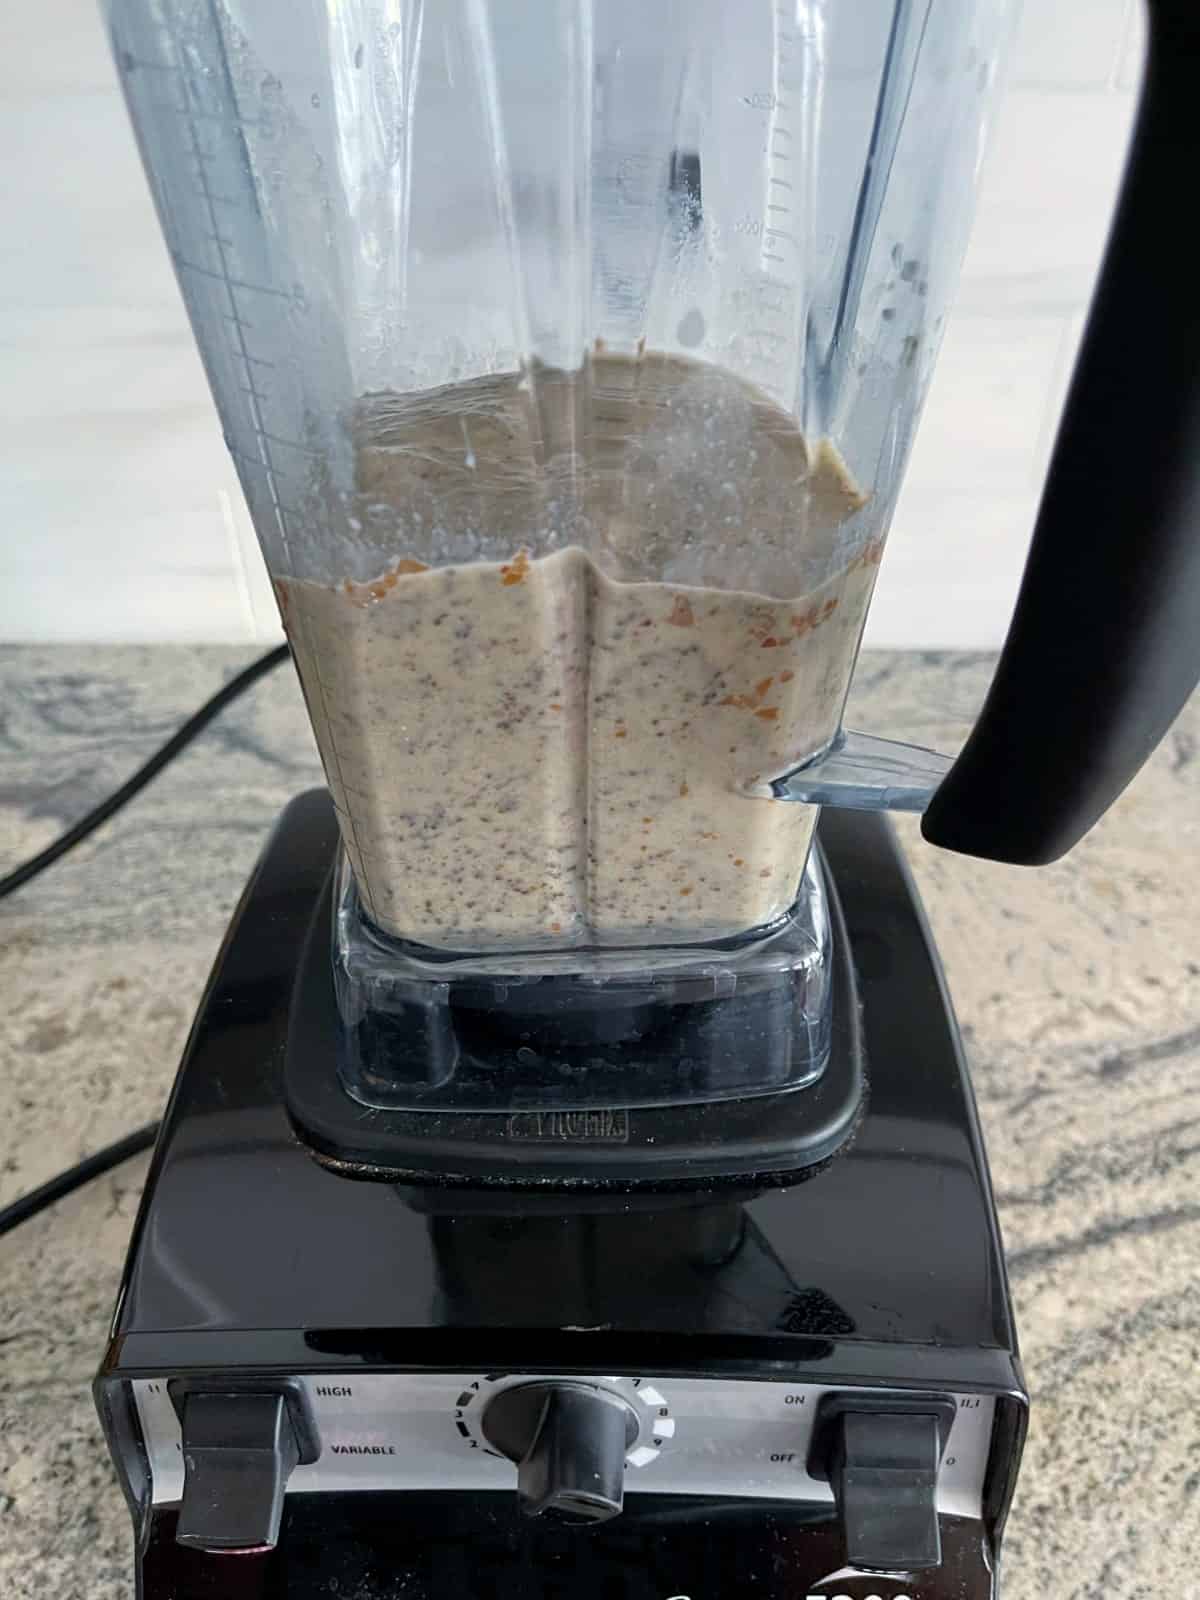 Blended almond milk, chia seeds and dates in Vitamix blender.